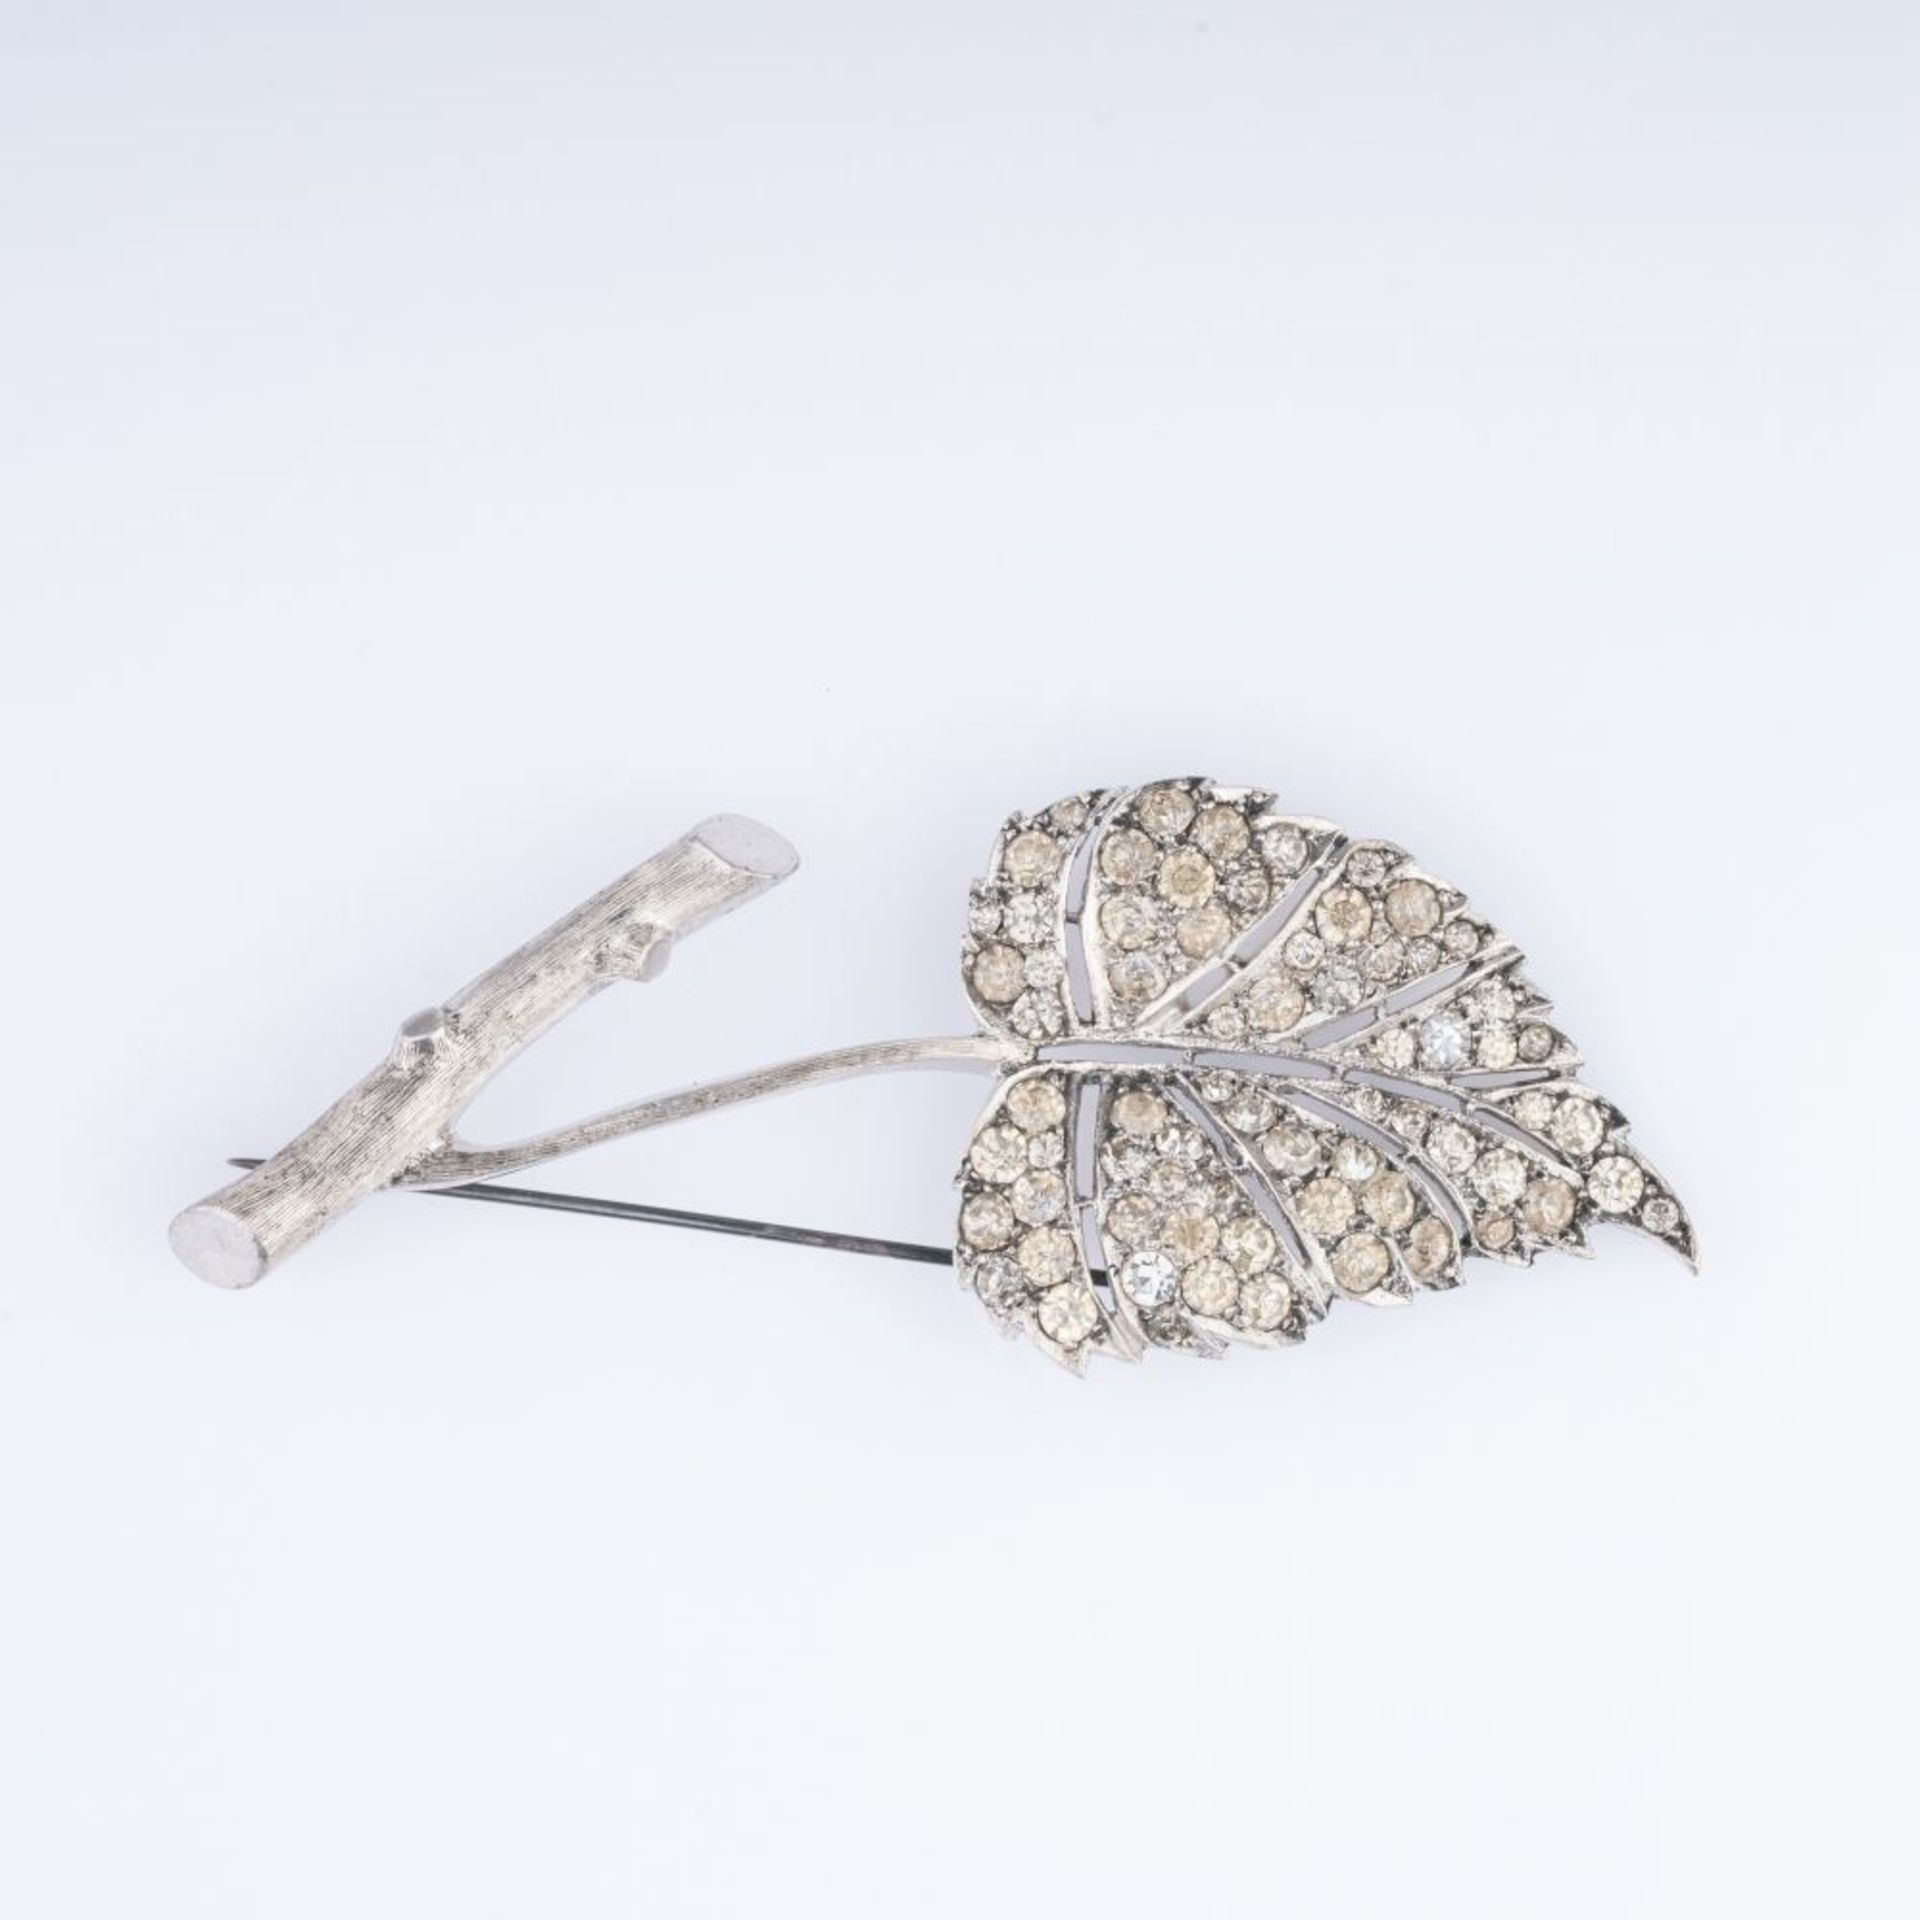 Dior, Christian. A Vintage Costume Jewellery Flower Brooch with Paste Stones.